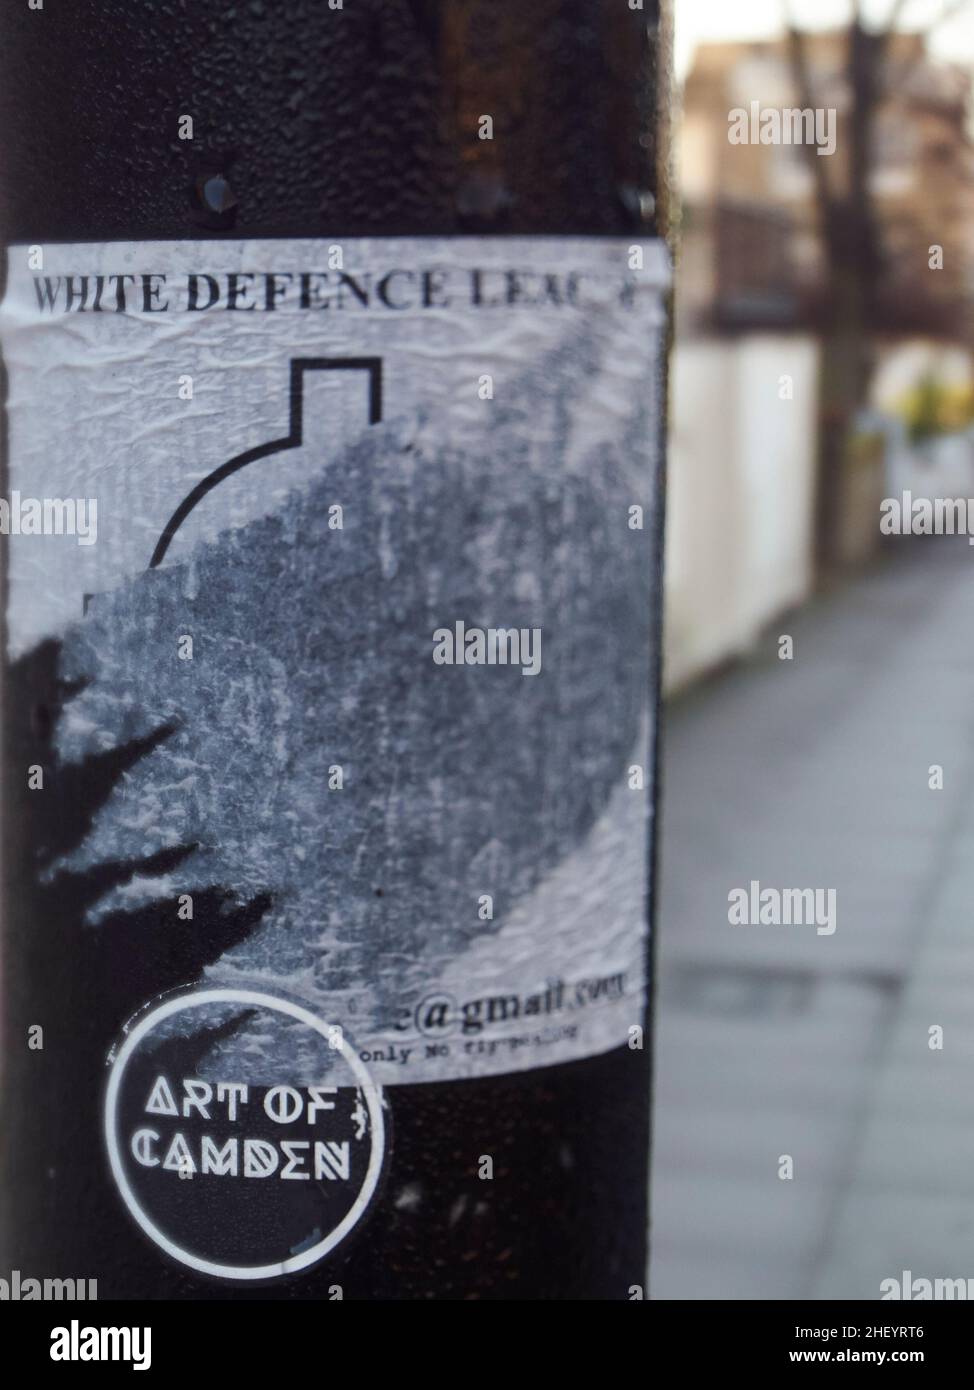 Political debate by proxy on the streets of London, UK - a sticker supporting the far right White Defence League on a lamp post, torn and defaced. Stock Photo